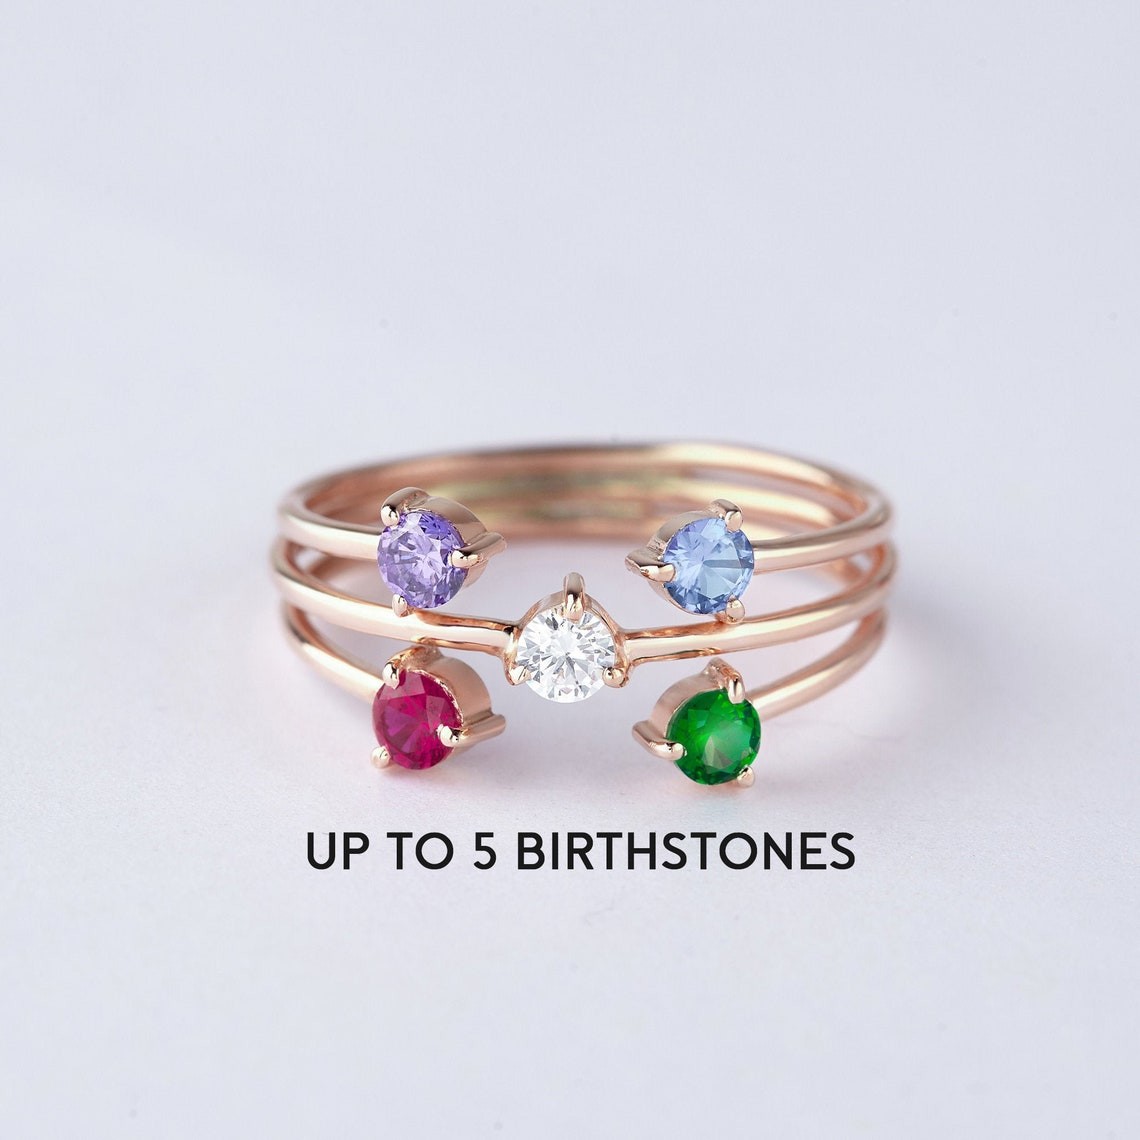 Personalized Birthstone Ring with 1-5 Birthstones Mother's Day Gift